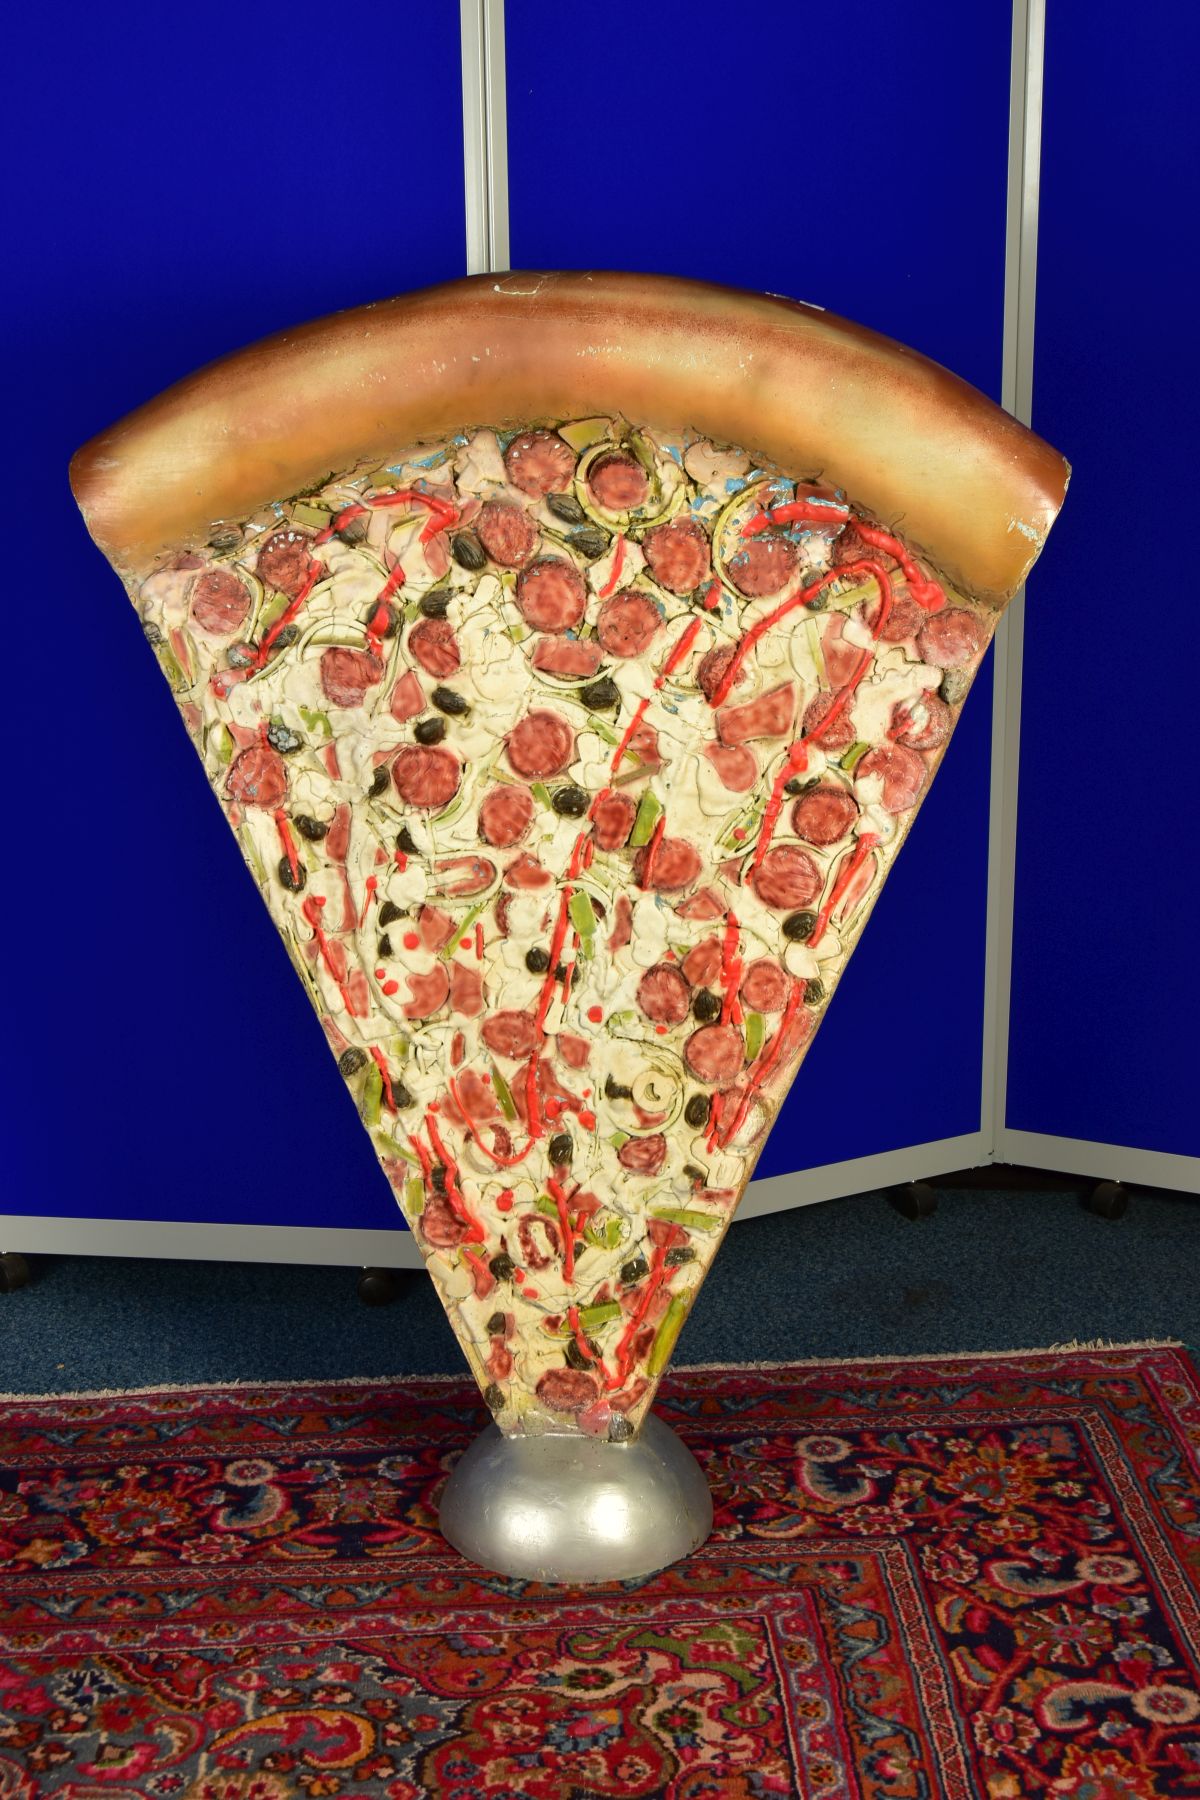 AN UPRIGHT JUMBO PIZZA ADVERTISING SIGN, detailed with a mass of toppings and deep crust, cast